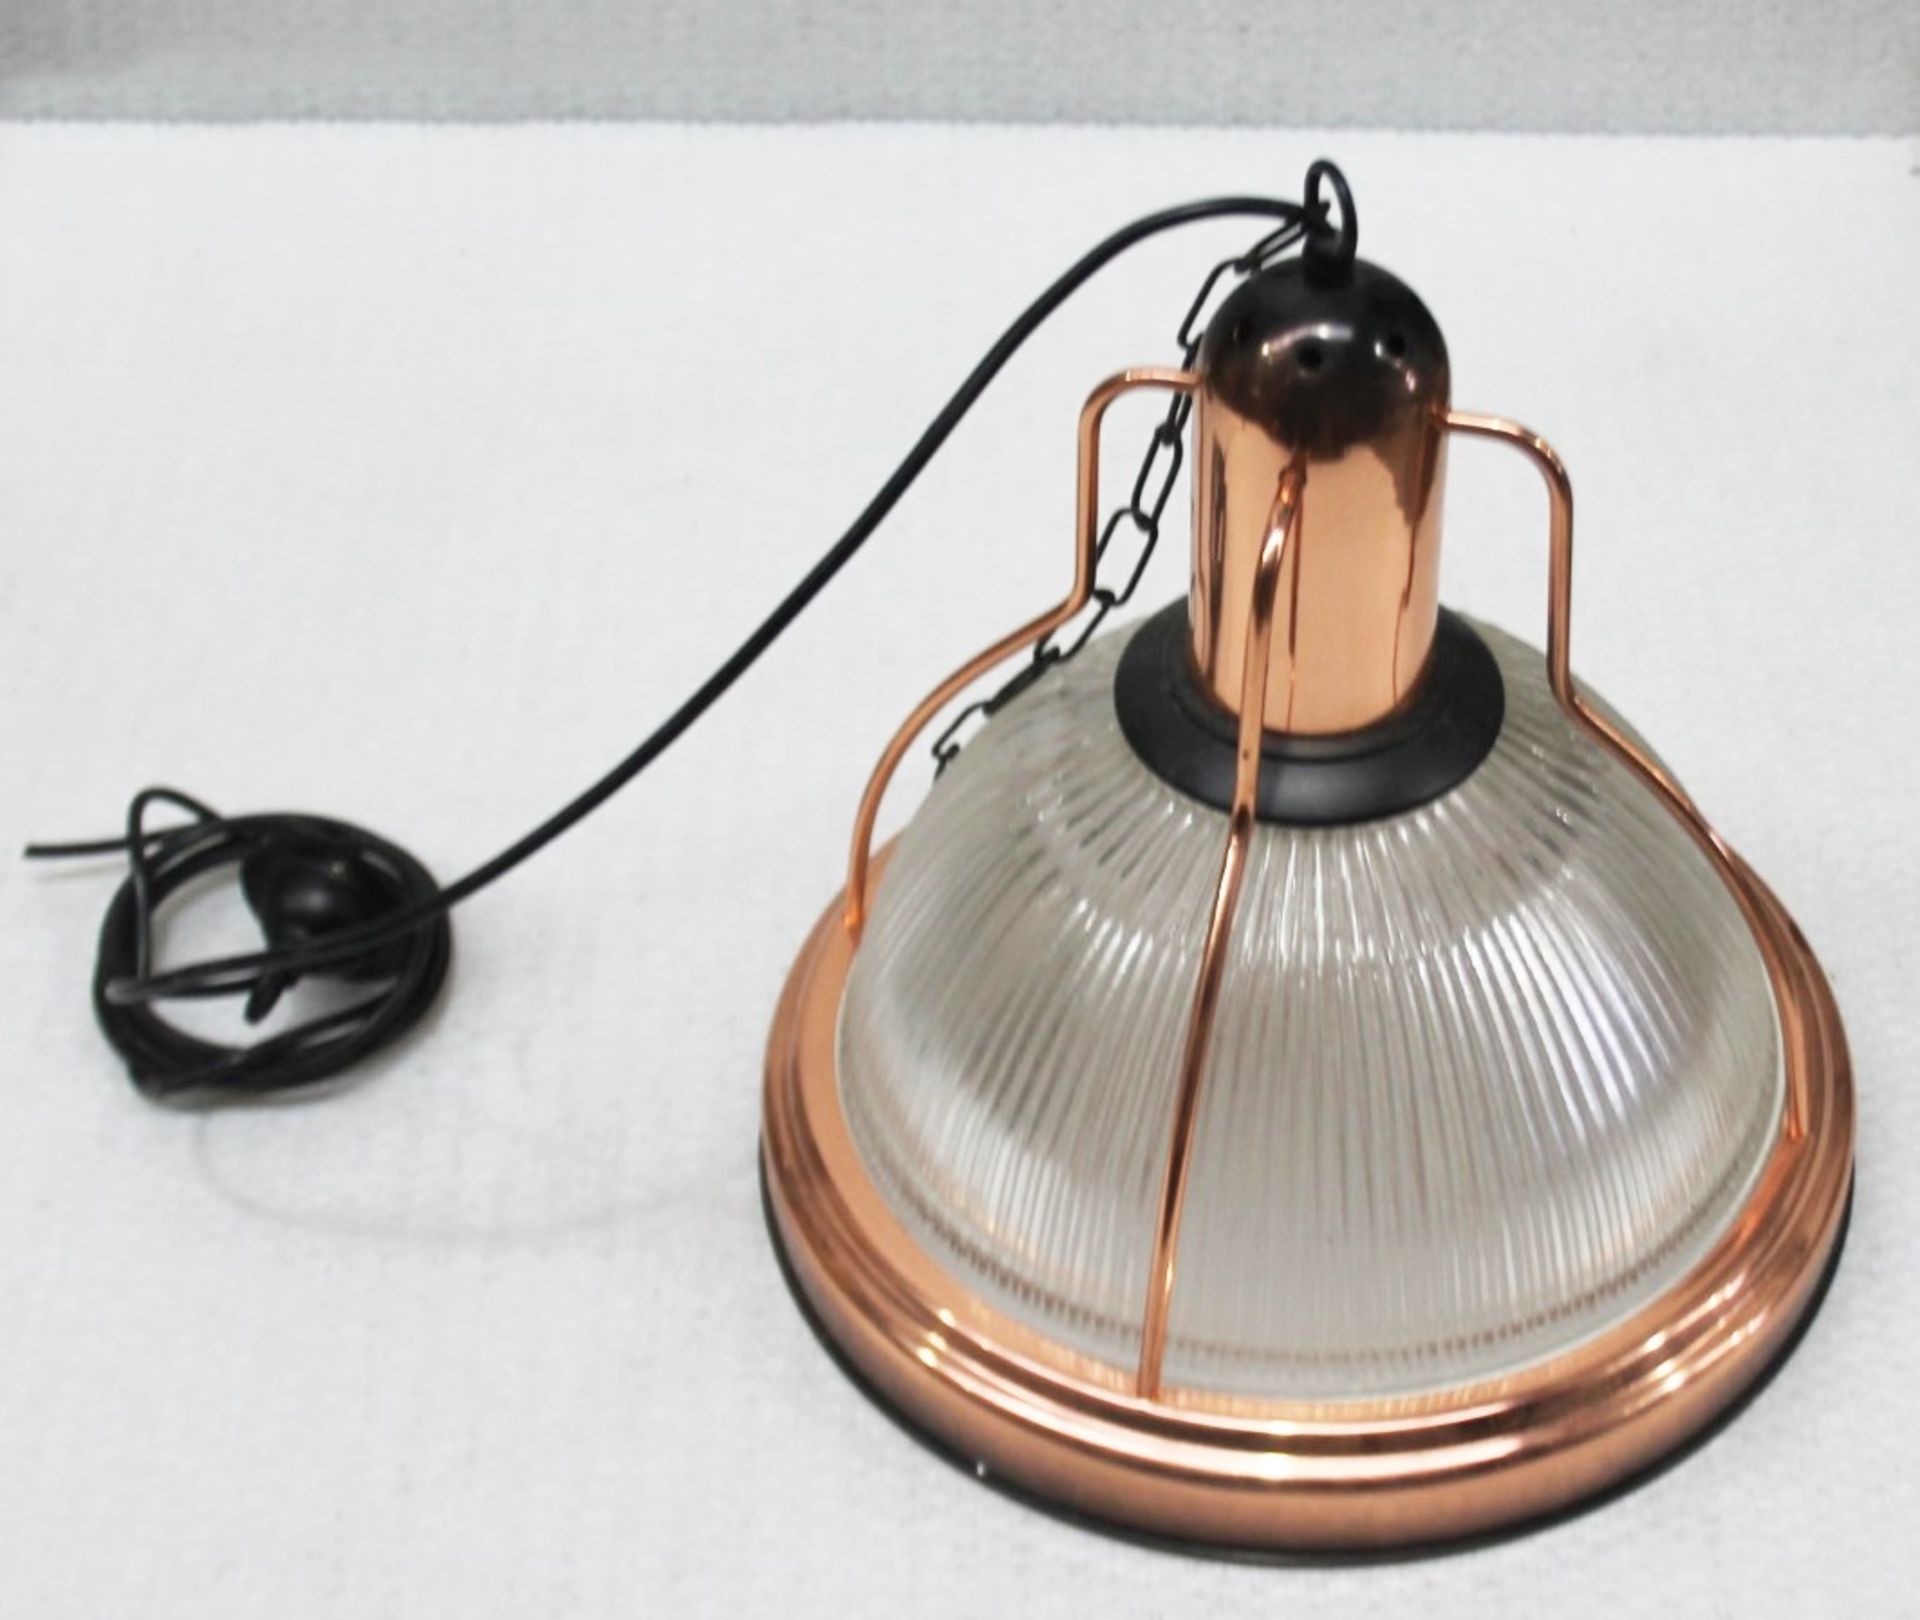 9 x Industrial-style Pendant Light Fittings In Copper With Pleated Glass Shades - Ref: GEN557 - Image 2 of 5